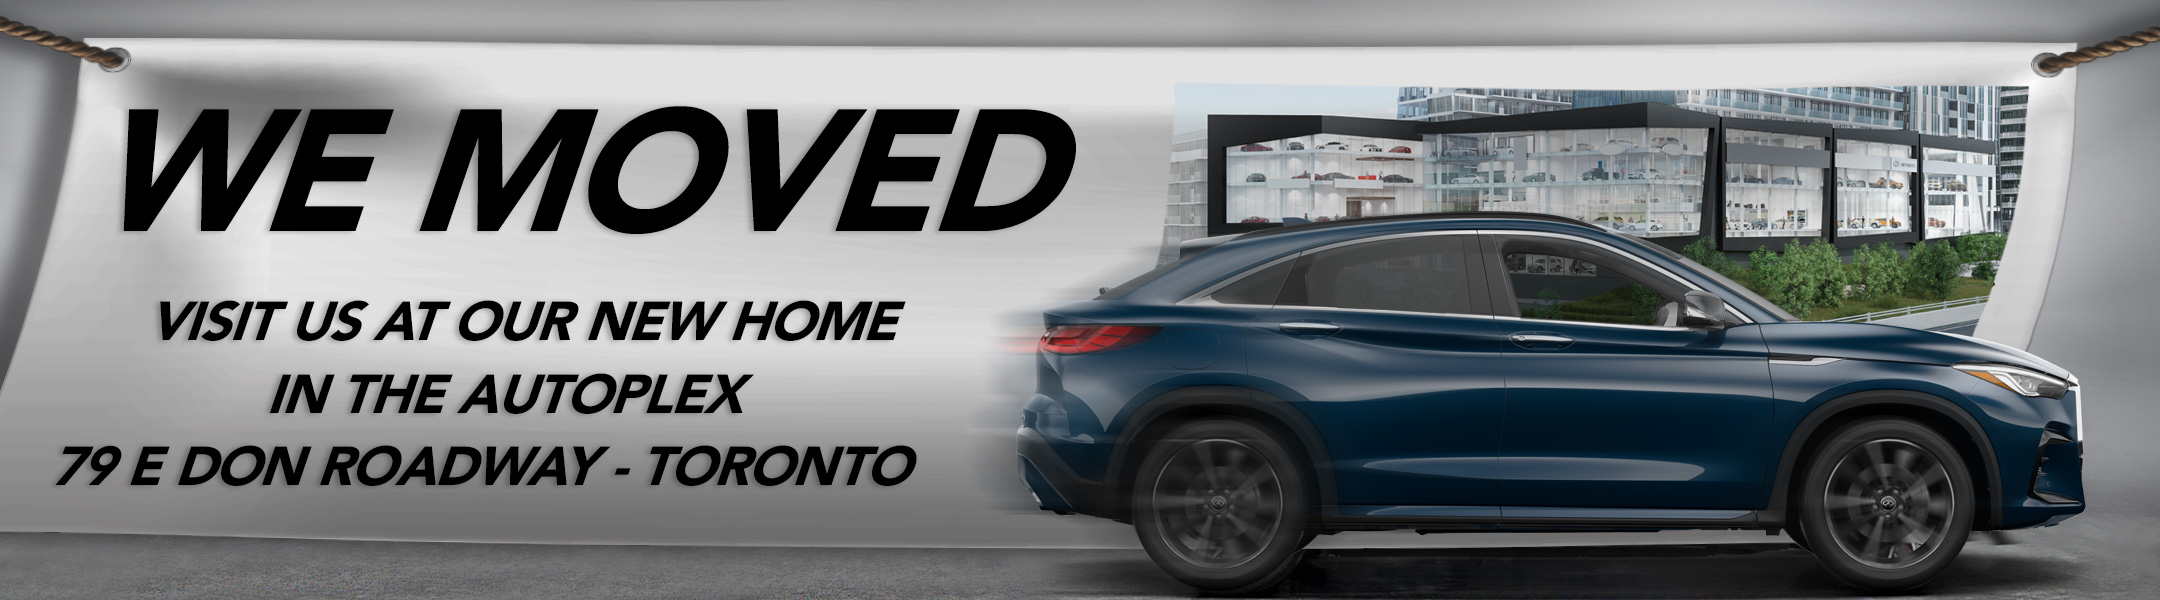 We Moved into the Autoplex in Toronto at 79 E Don Roadway